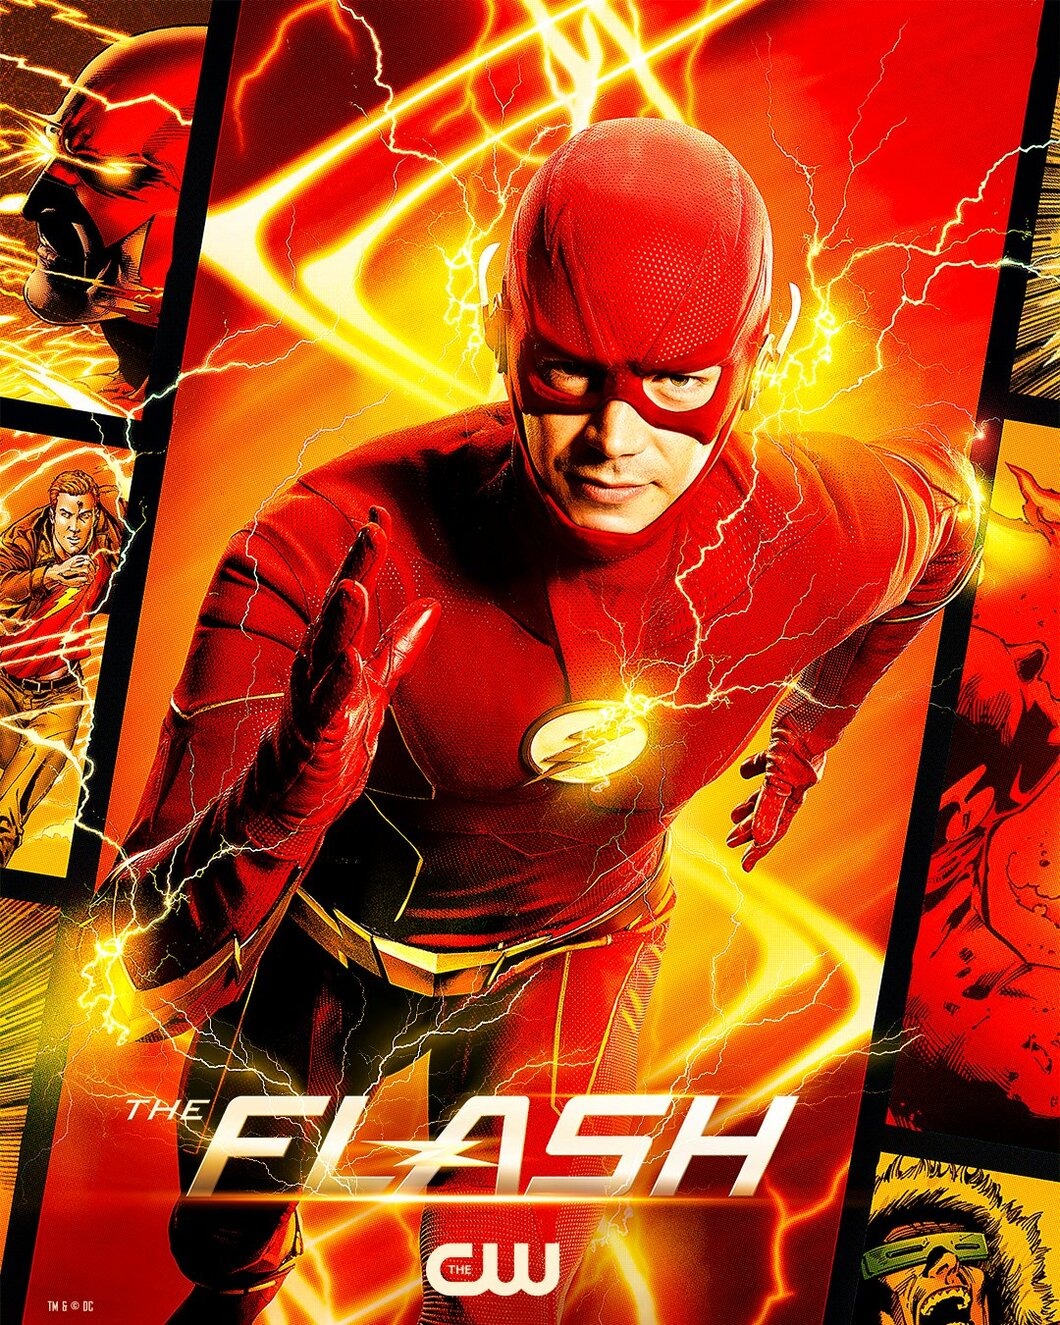 Extra Large TV Poster Image for The Flash (#40 of 65)